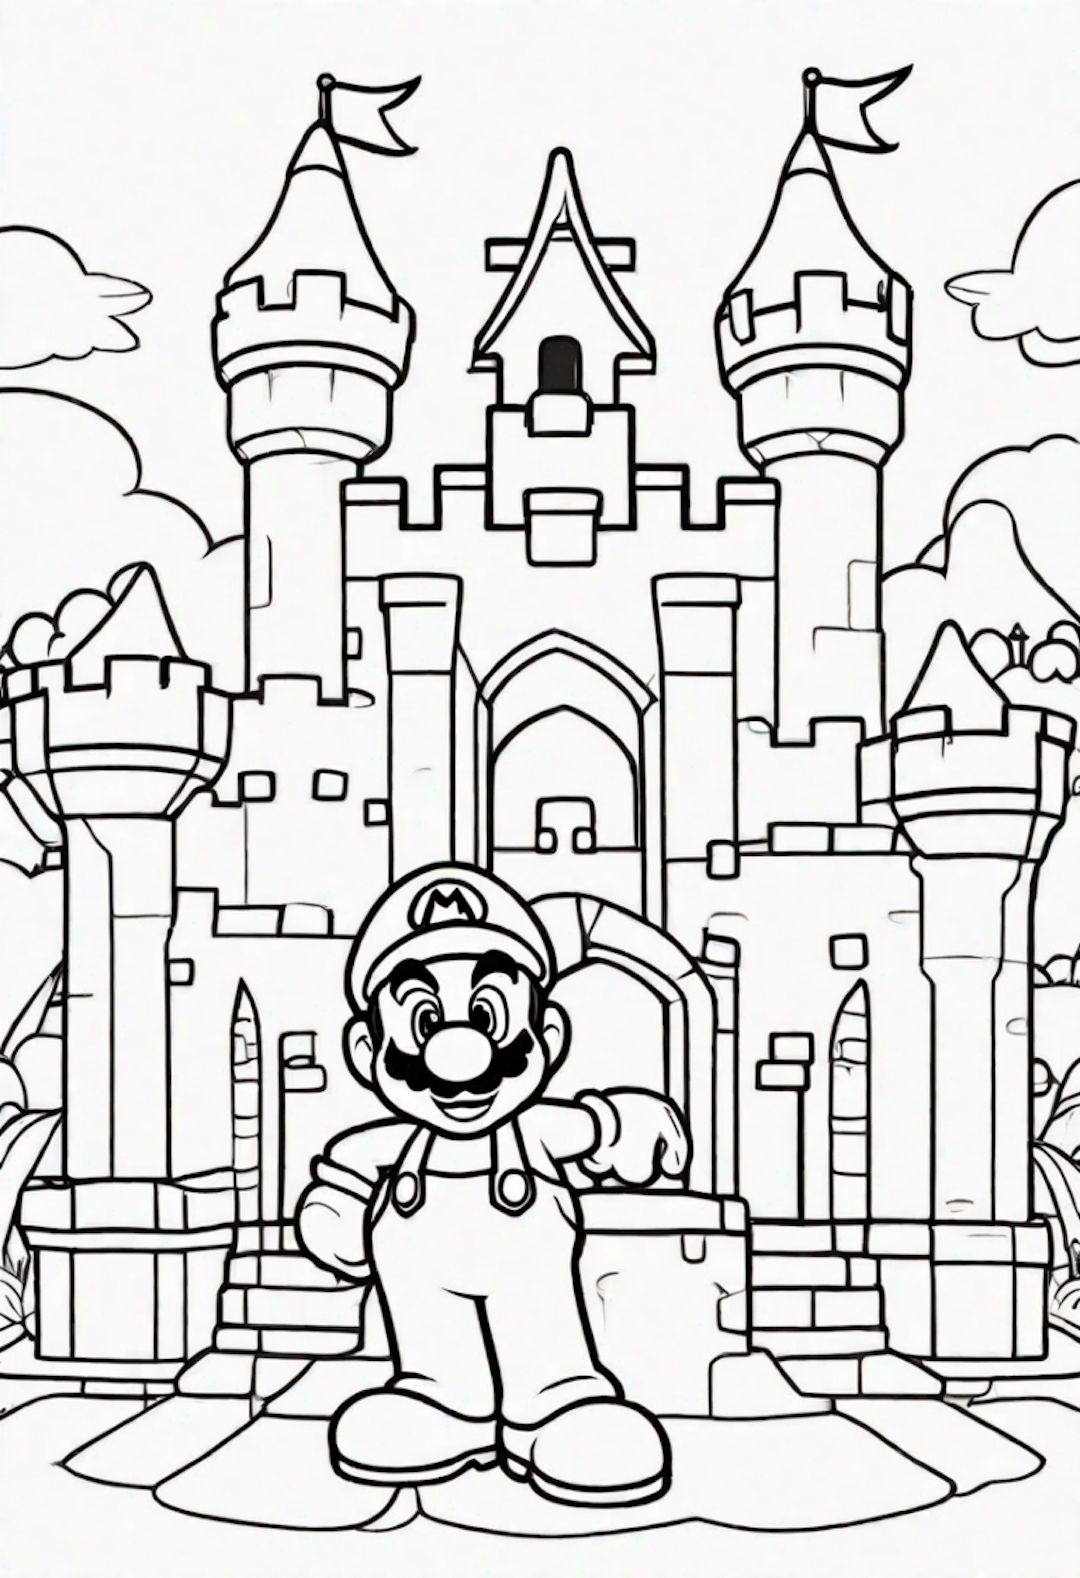 Mario at Peach’s Castle coloring pages